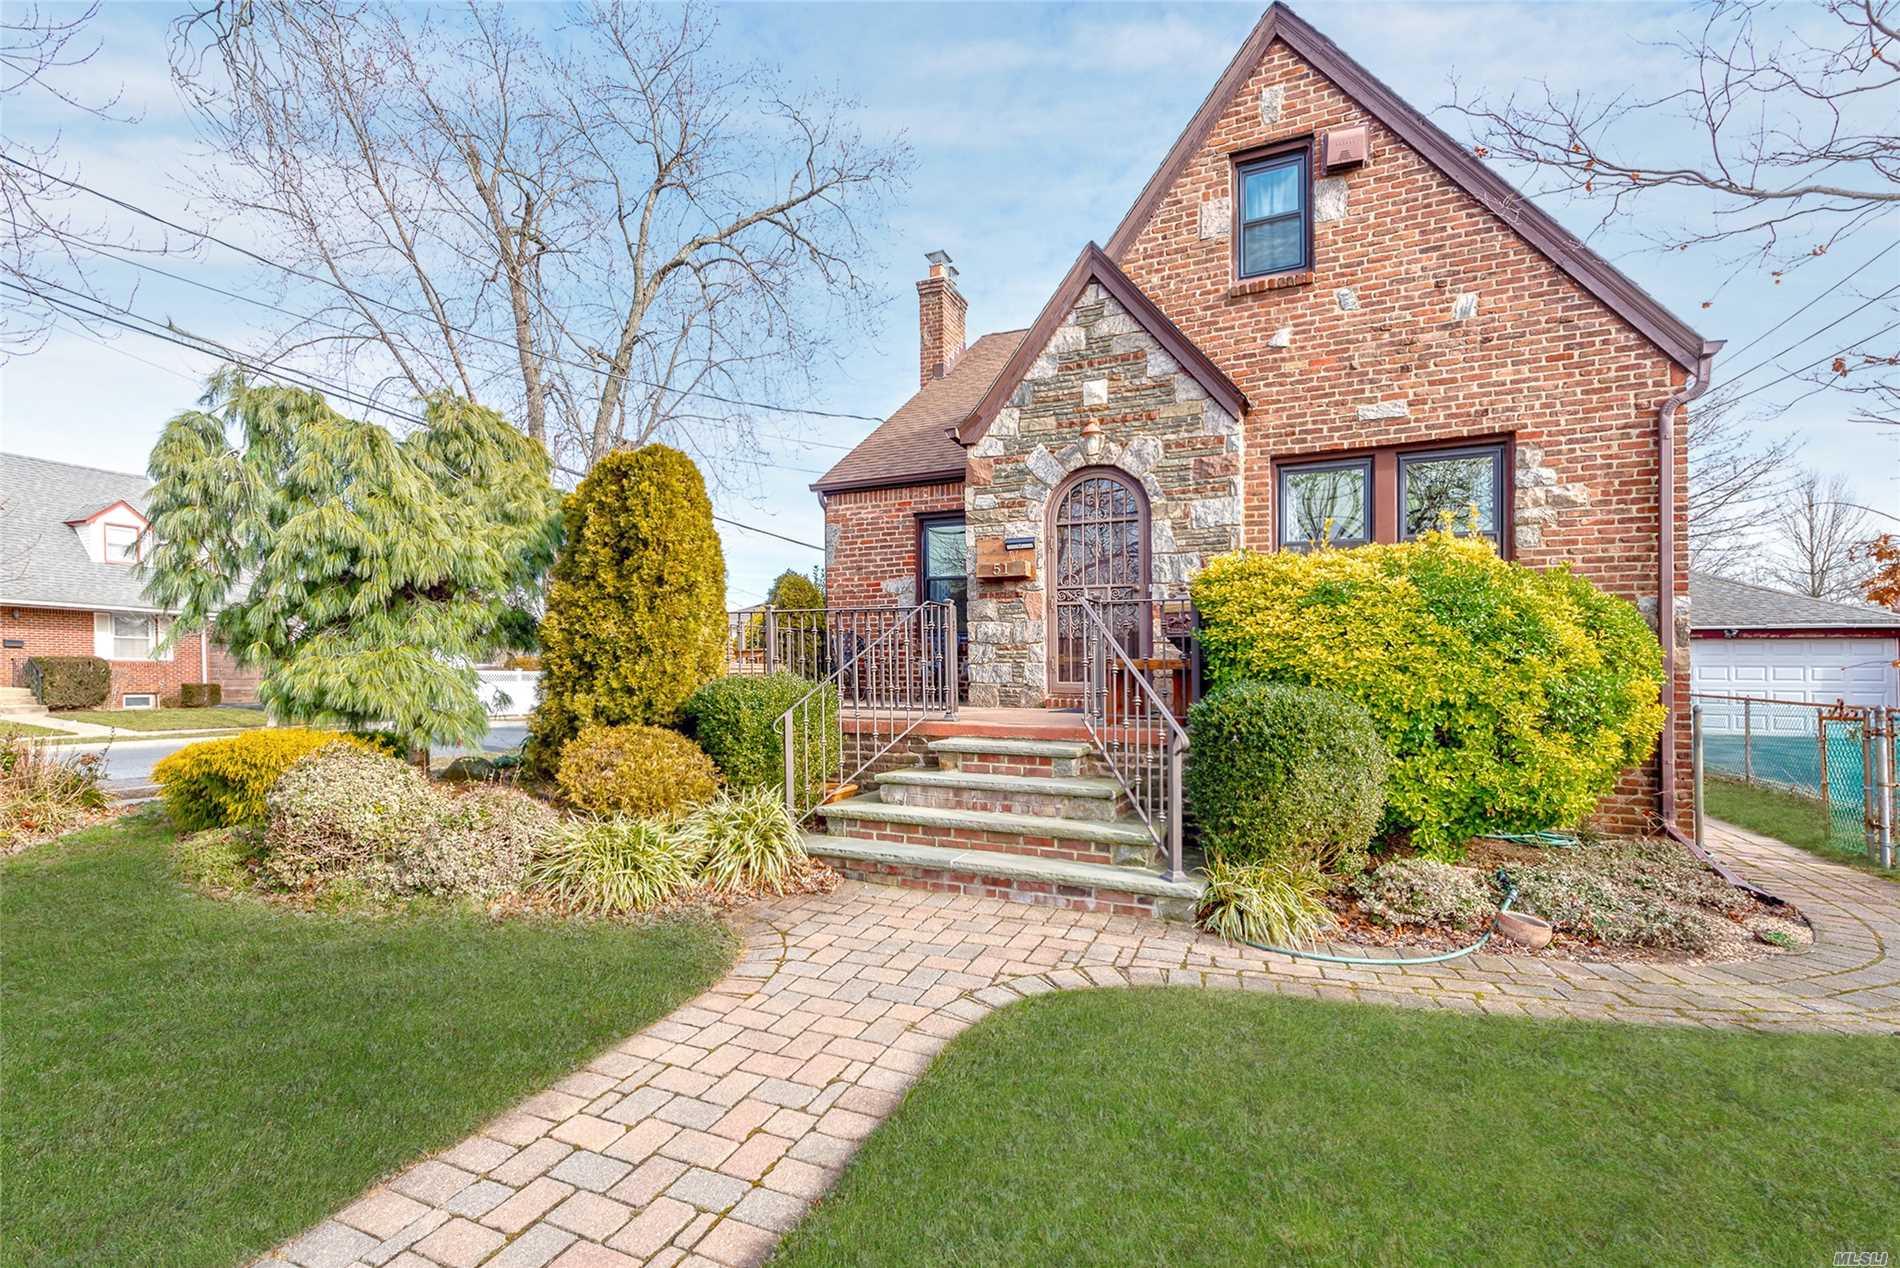 Updated Classic 5/6Br Brick Tudor W/Its Own Distinctive Style & Character! 51 Central Blvd - For G P S Is 2371 Central Blvd--Offers A 2-Car Garage/Rafter Storage, Granite Eik, Jacuzzi, Pvc Fence, Updated Roof, Pavers, Entry Steps, Crown Moldings, Inlay Hardwood Floors, Stone Fireplace, Finished Basement & Hihats! Gas Heat/Gas Stove, 200 Amps, Security To Station, Some Marvin Windows, Ductless Cac. Professionally Landscaped Yard.